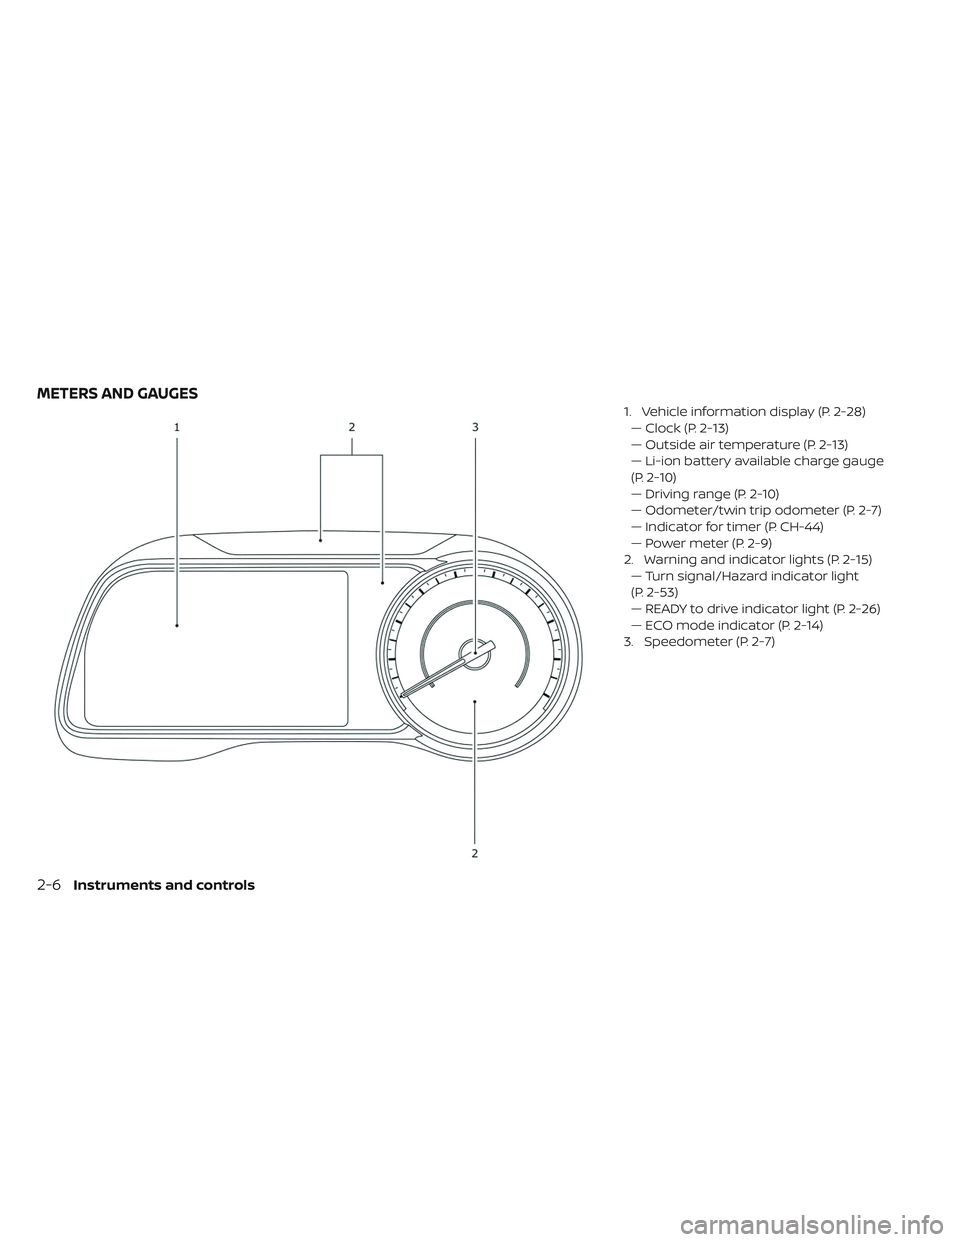 NISSAN LEAF 2019  Owner´s Manual 1. Vehicle information display (P. 2-28)— Clock (P. 2-13)
— Outside air temperature (P. 2-13)
— Li-ion battery available charge gauge
(P. 2-10)
— Driving range (P. 2-10)
— Odometer/twin trip